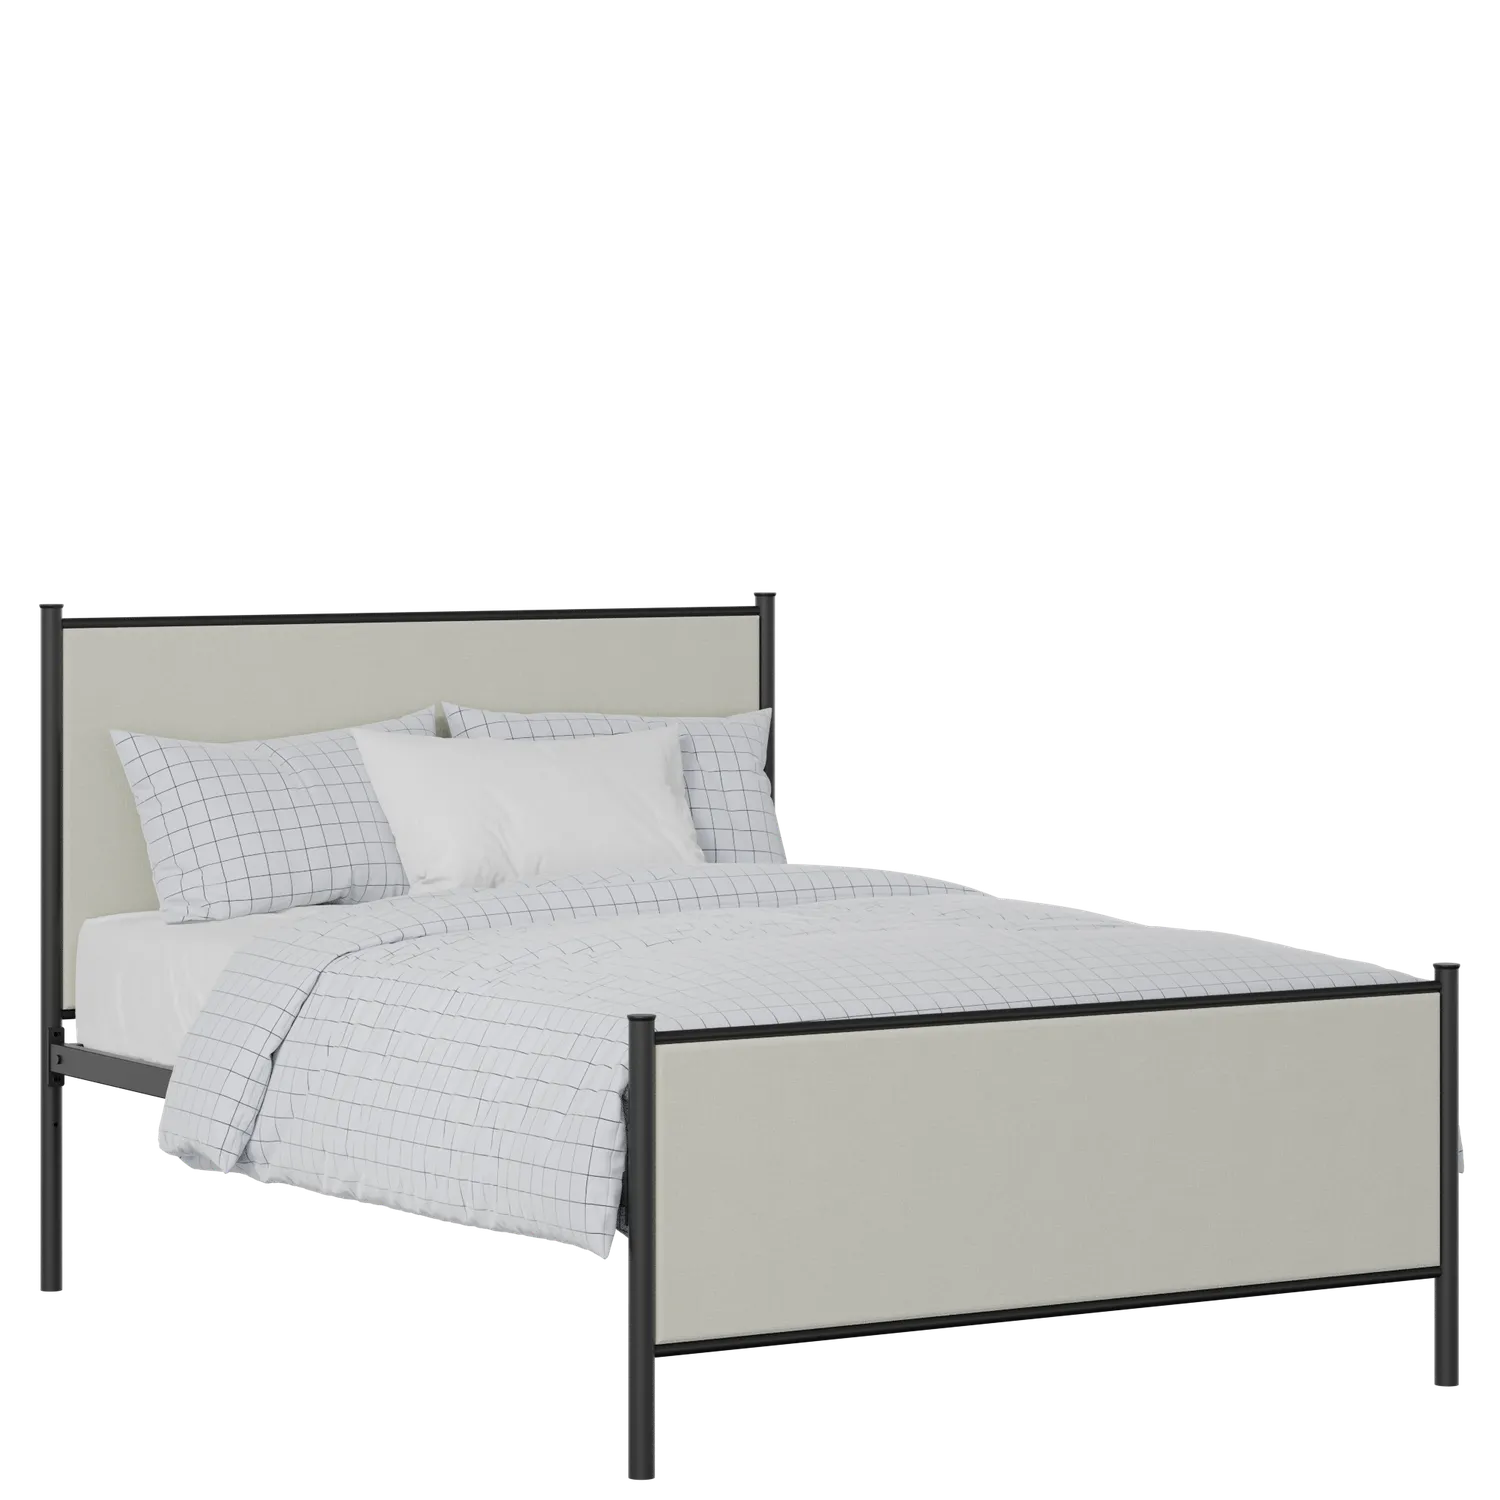 Brest iron/metal upholstered bed in black with oatmeal fabric